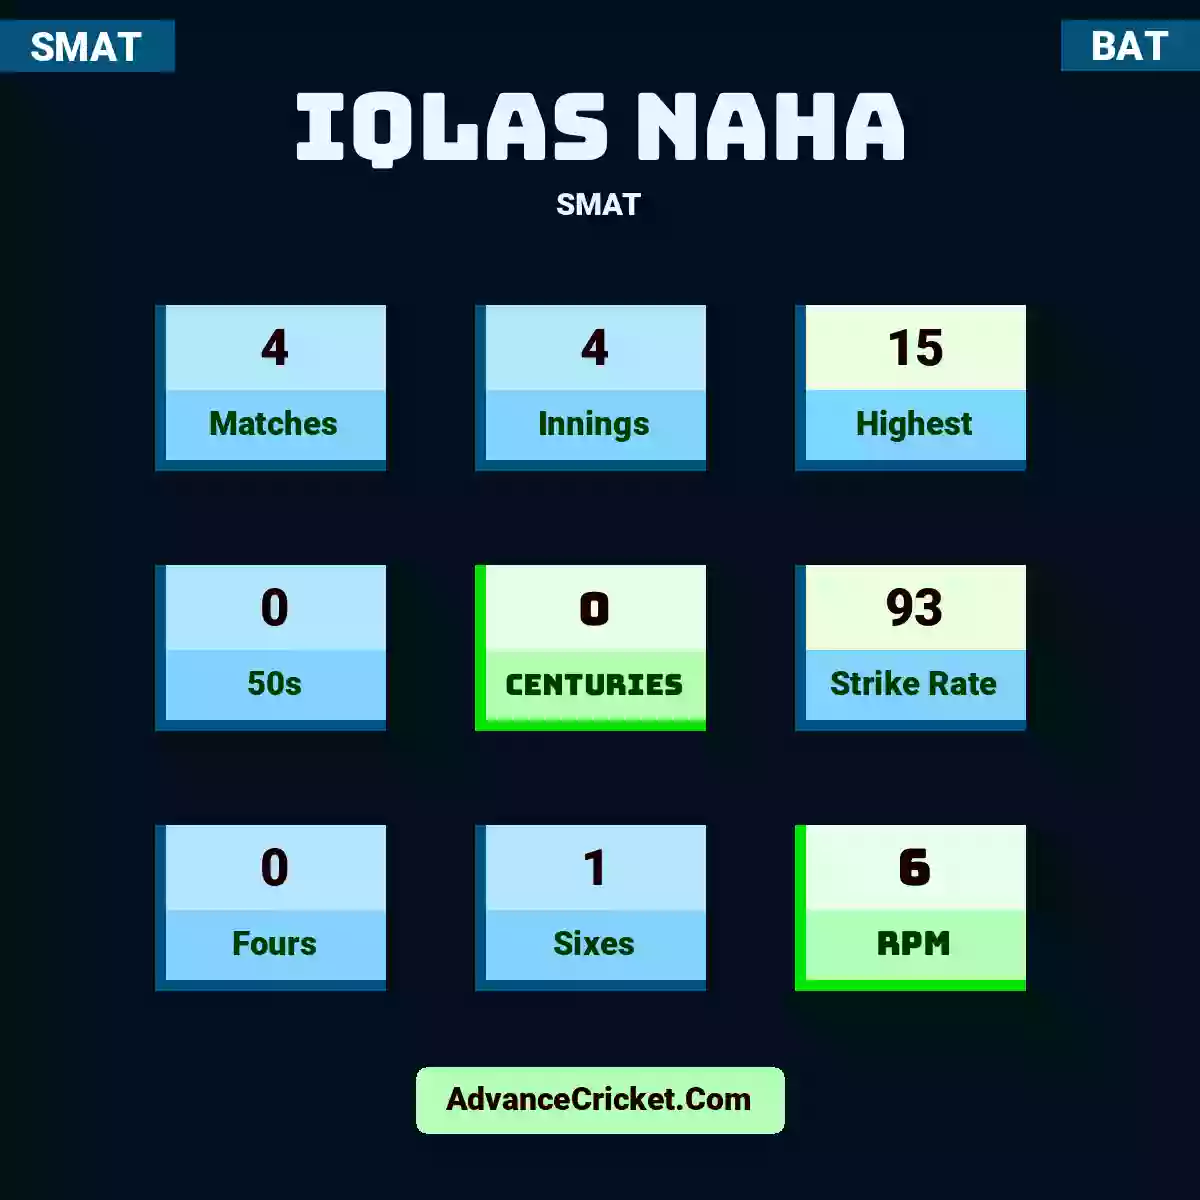 Iqlas Naha SMAT , Iqlas Naha played 4 matches, scored 15 runs as highest, 0 half-centuries, and 0 centuries, with a strike rate of 93. I.Naha hit 0 fours and 1 sixes, with an RPM of 6.